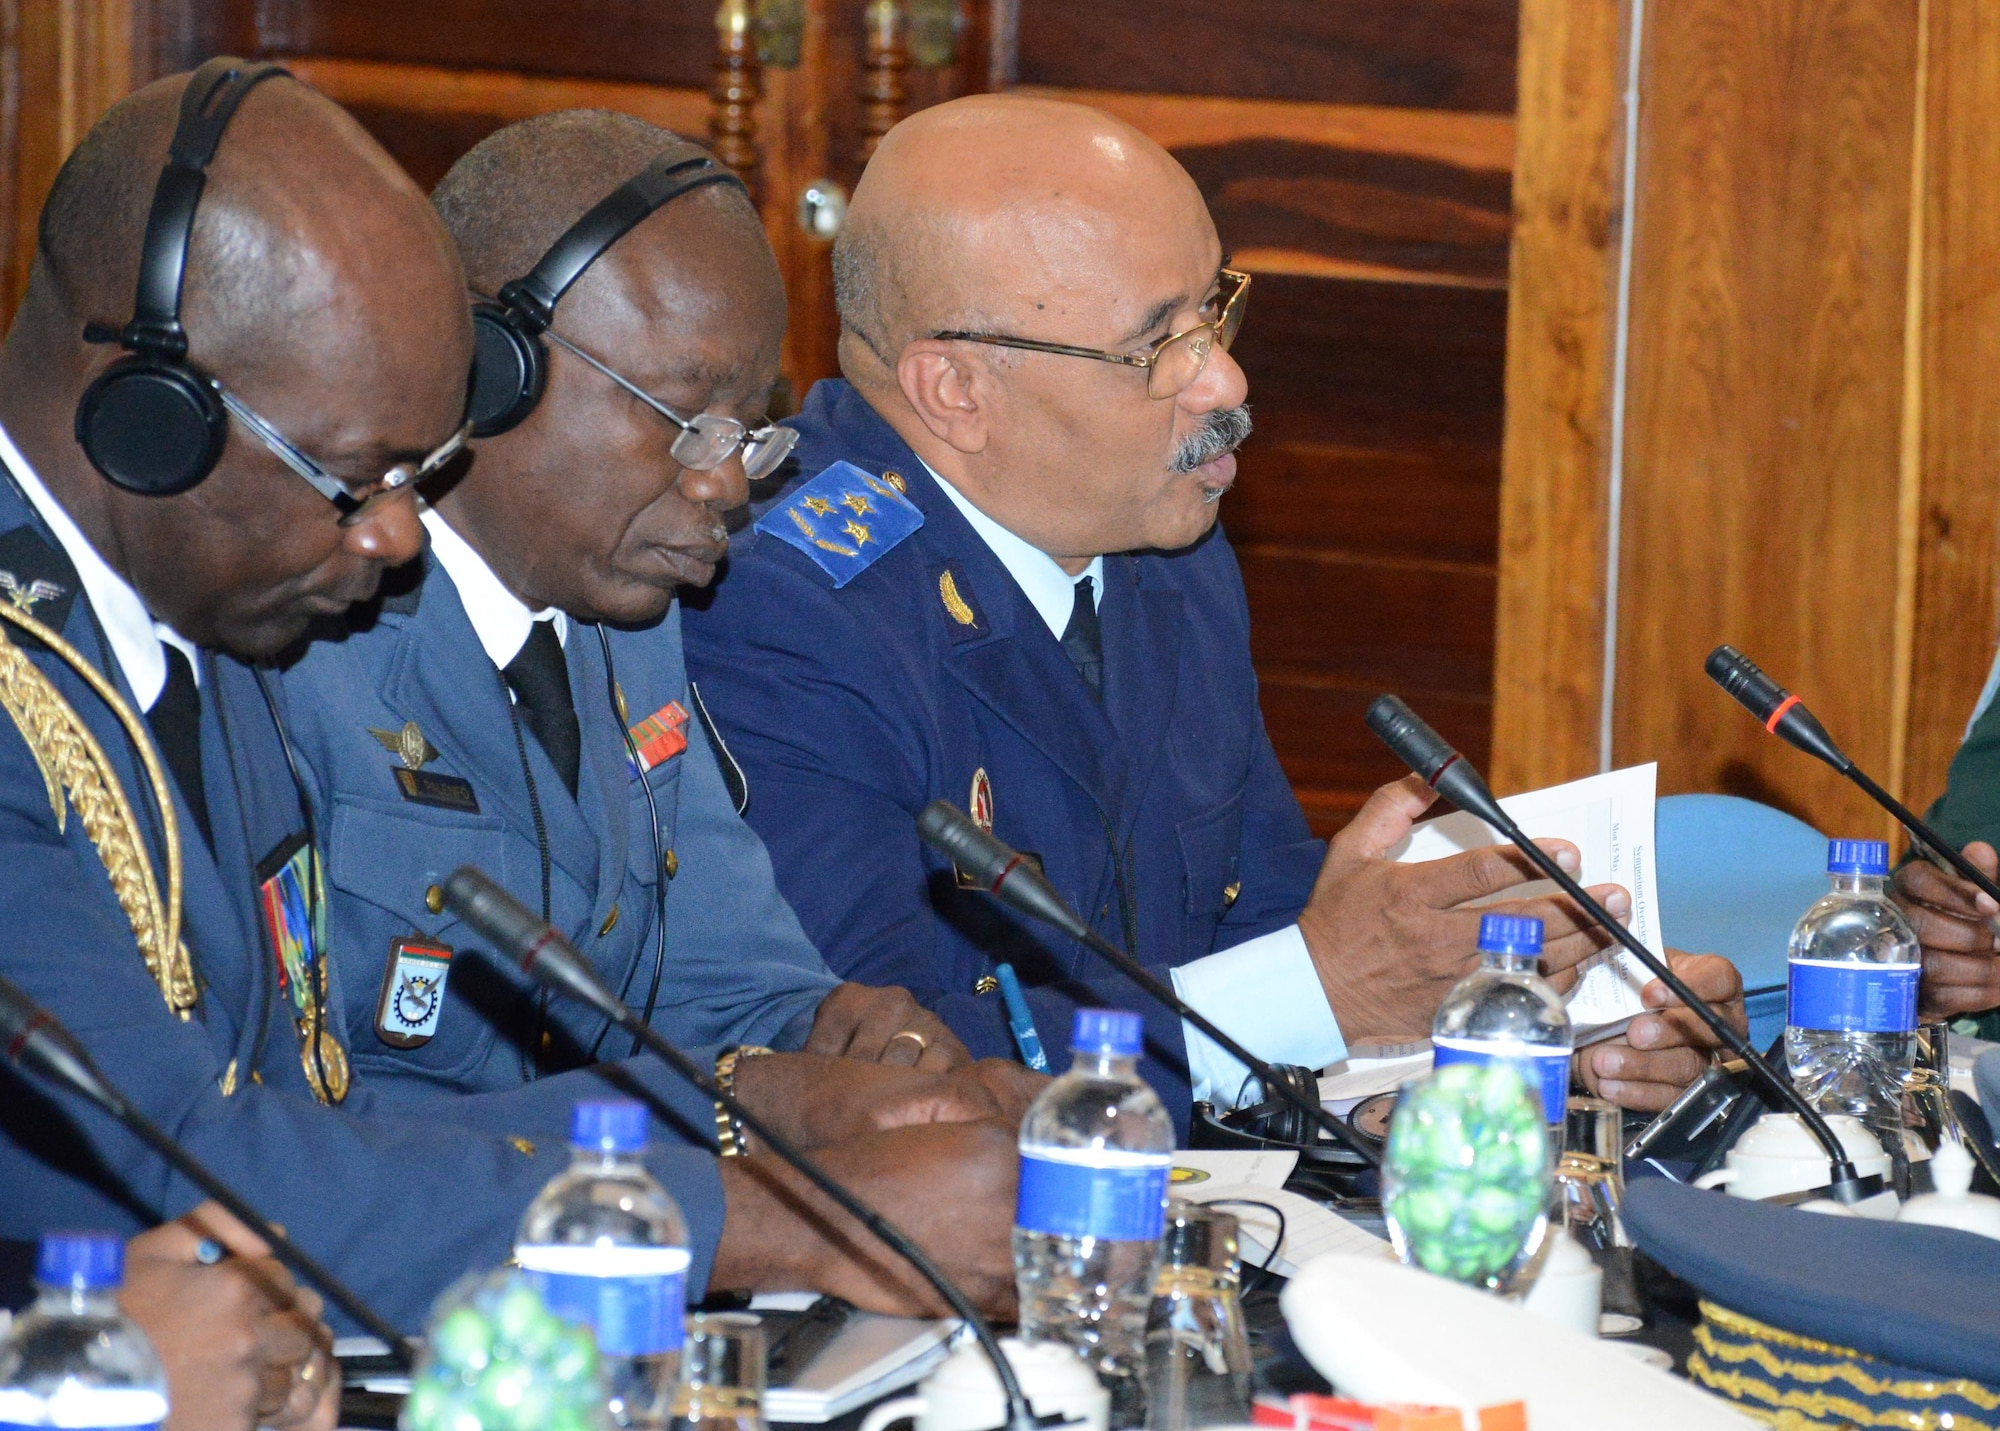 An air chief briefs during the 2017 African Air Chiefs Symposium in Kasane, Botswana, May 16, 2017. This is the seventh iteration and largest event to date. During the symposium, air chiefs participated in several round-table discussions focused on the training aspect of force development. (Courtesy photo by Botswana Defence Force Cpl. Kgomotso Mobiakgotla)